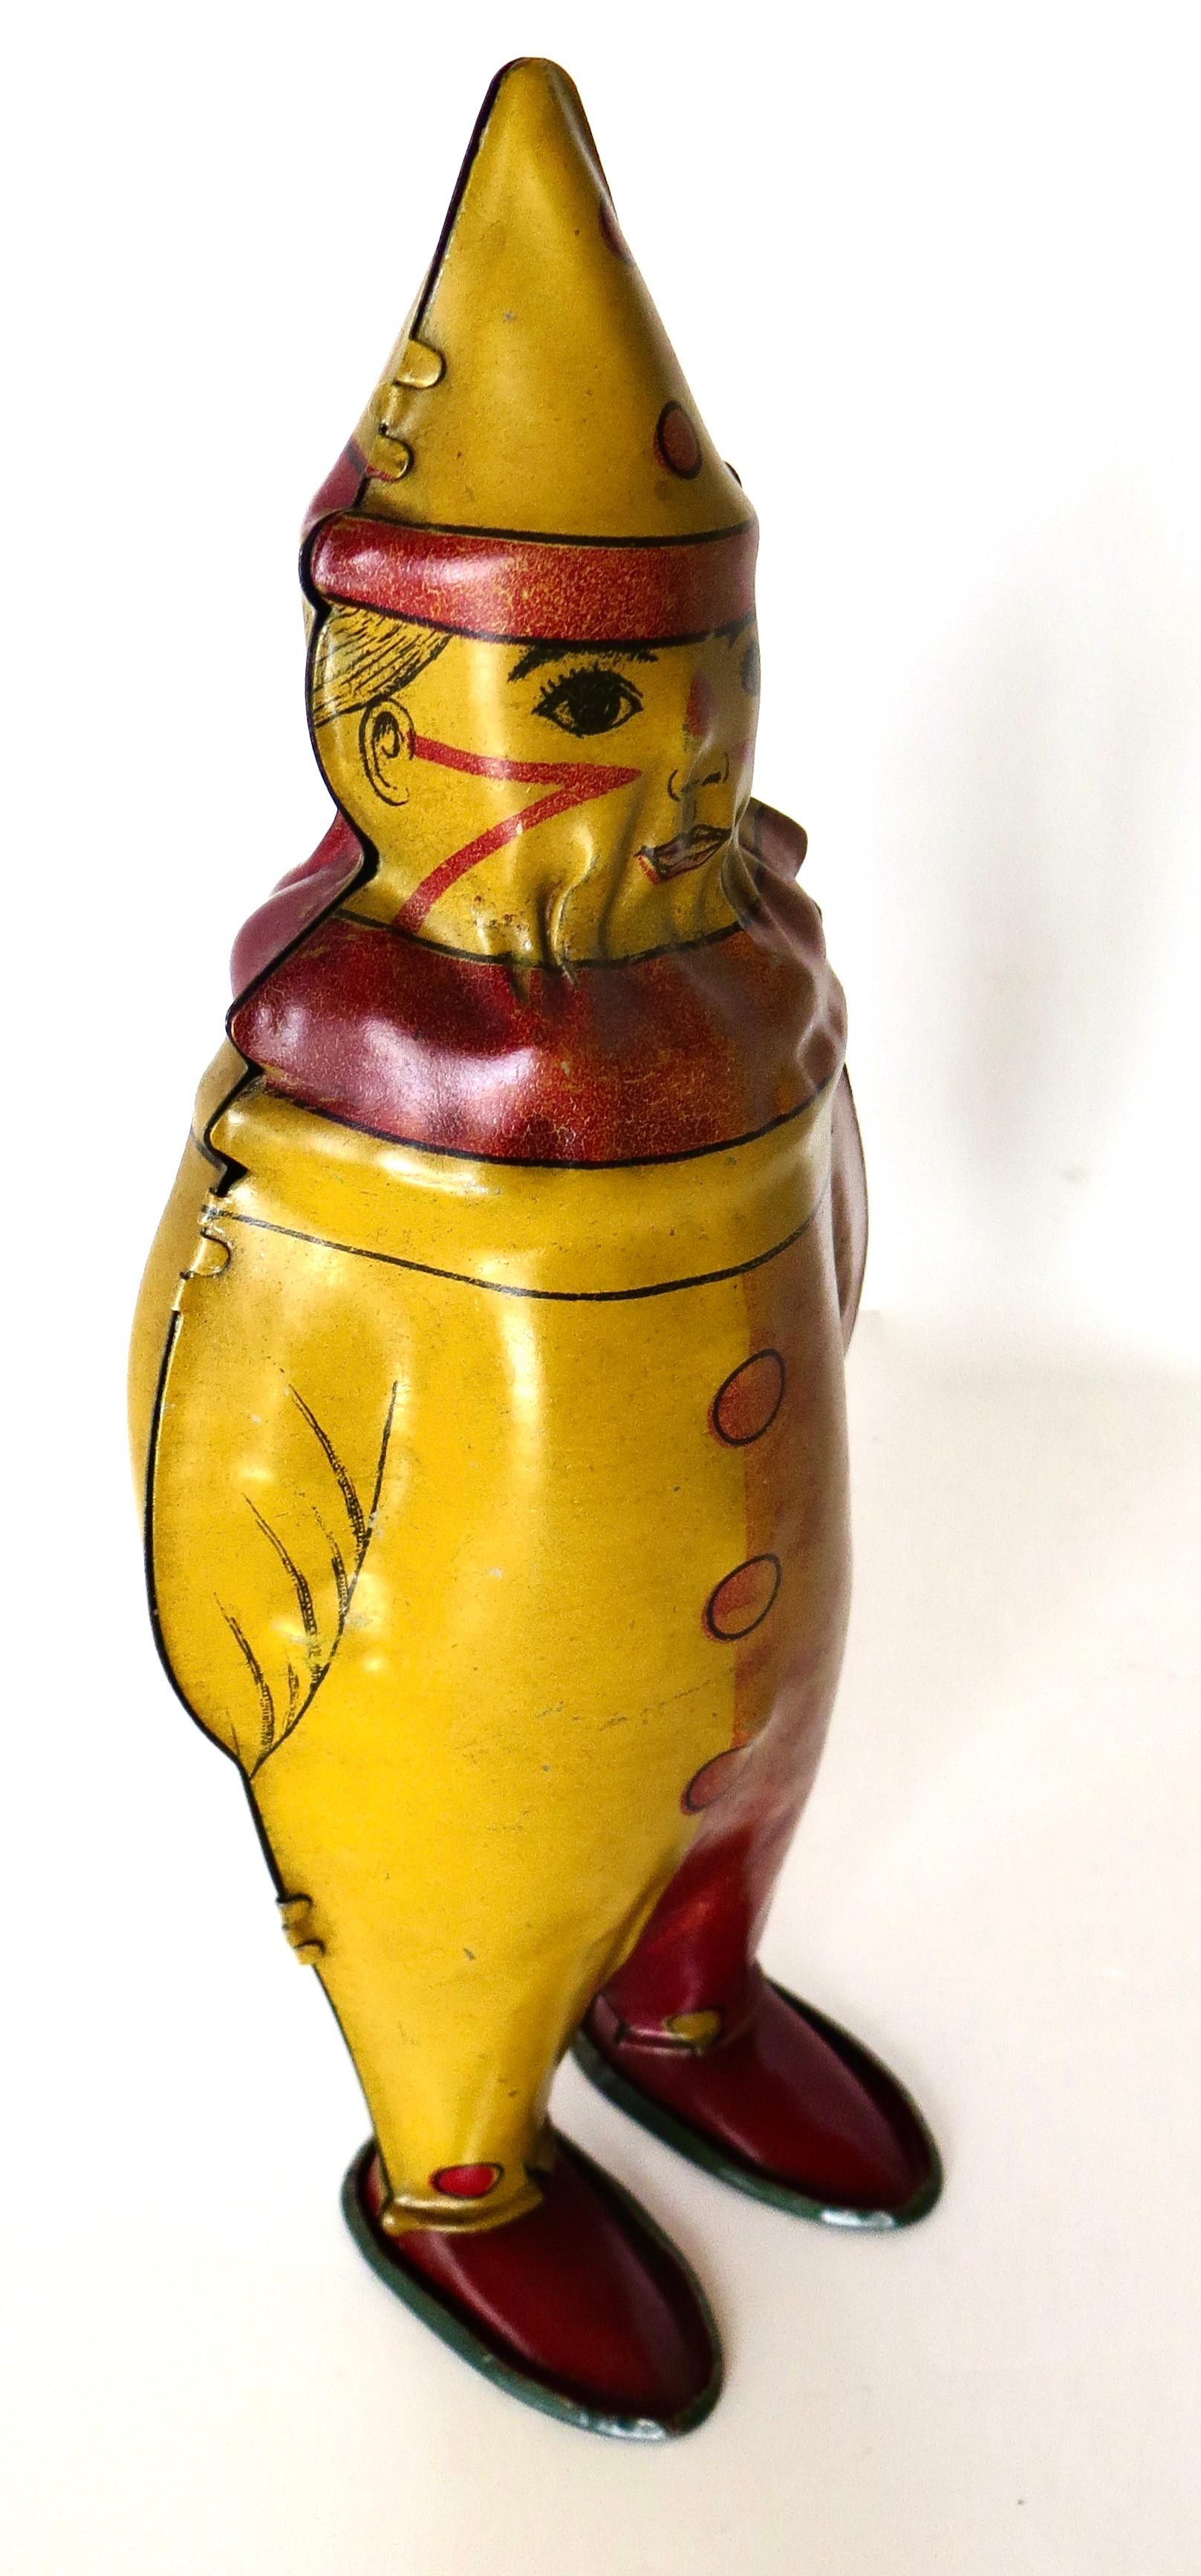 This is a hard to find pre war vintage, Made in America wind up tin toy by The Lindstrom Toy Company of Bridgeport, Connecticut, circa 1928-1932. The action is fabulous;  when wound up and released on a flat surface, it depicts 